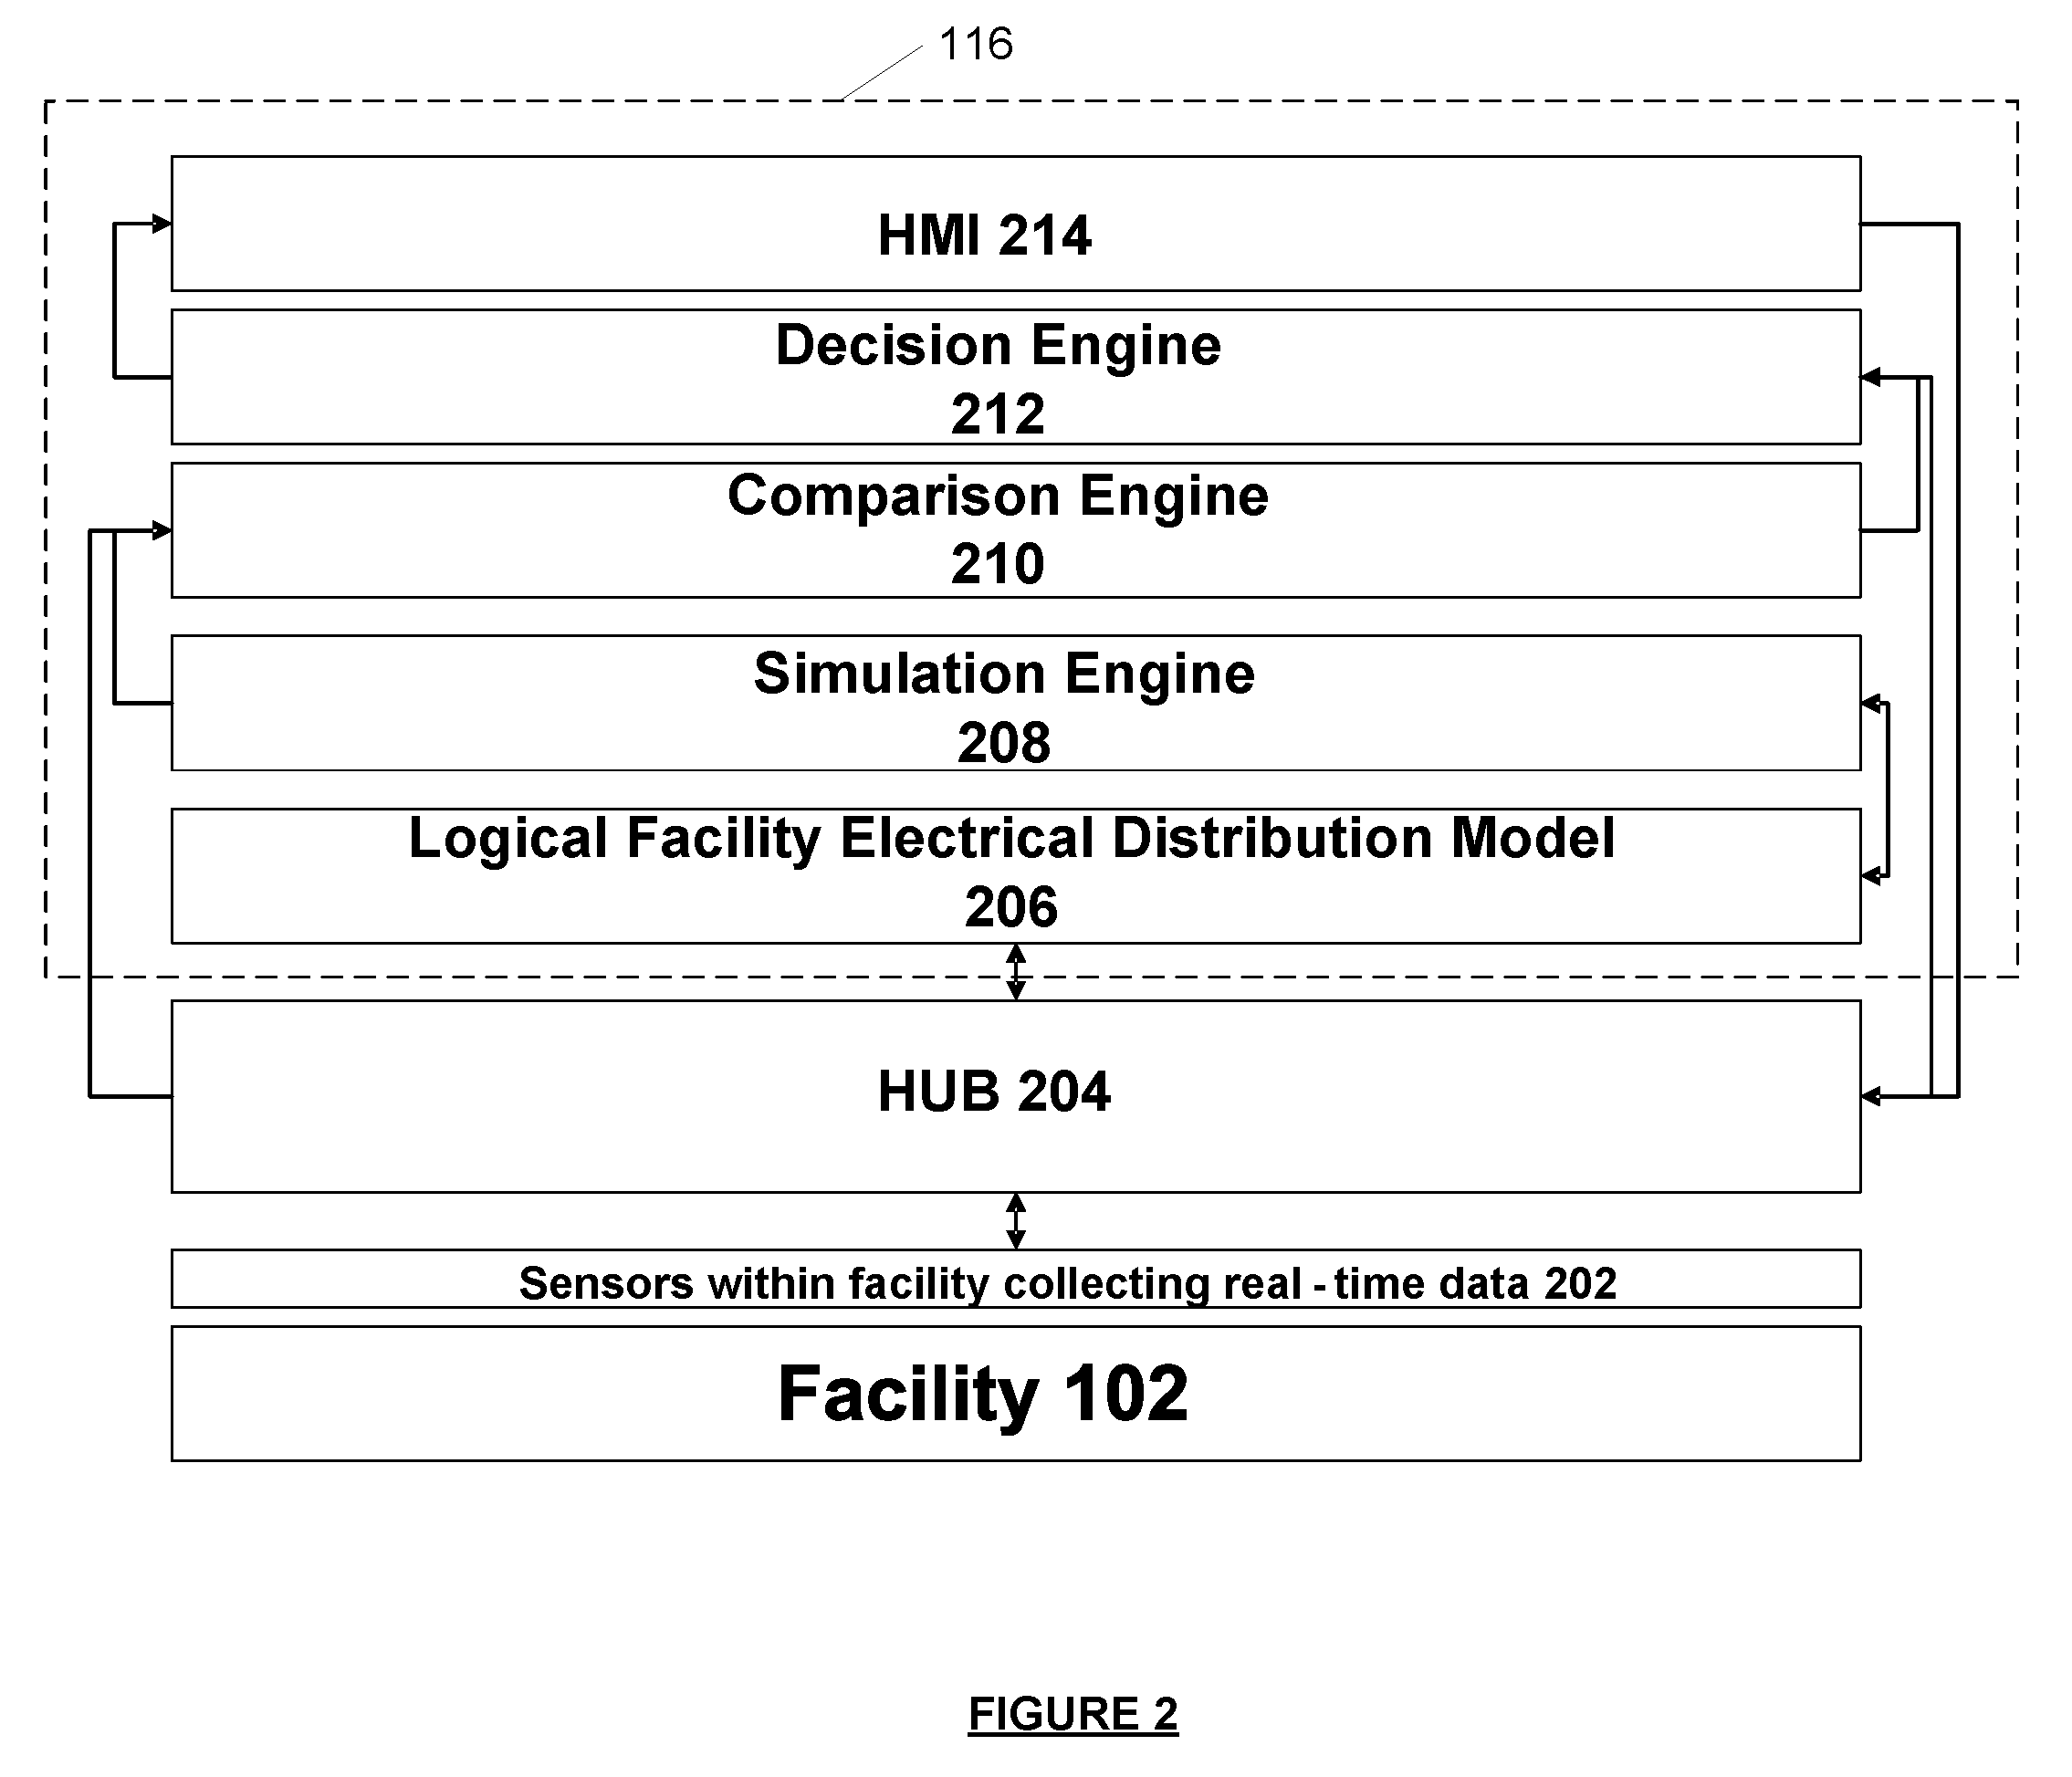 Systems and methods for real-time advanced visualization for predicting the health, reliability and performance of an electrical power system